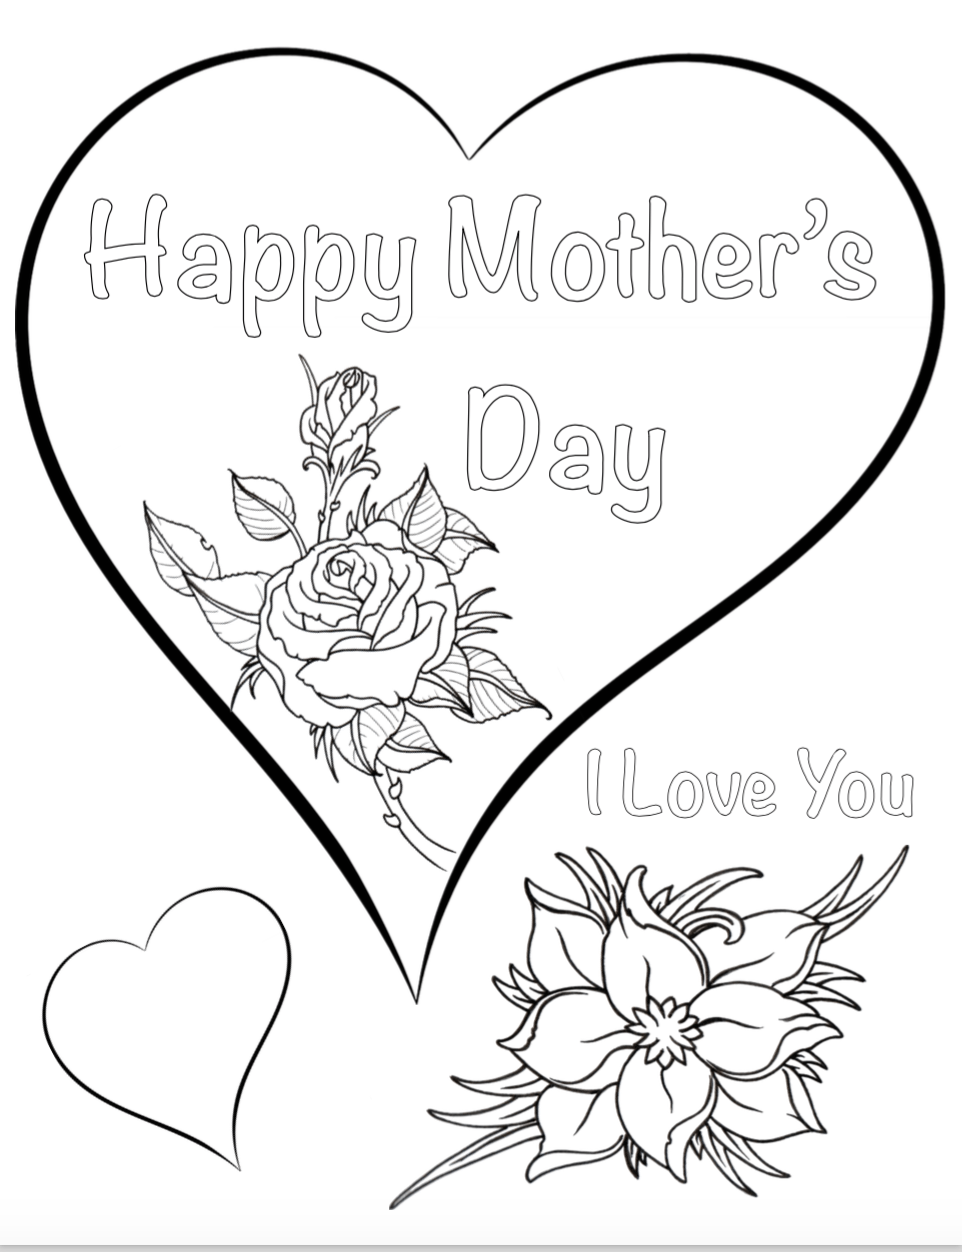 Download Free Printable Mother's Day Coloring Pages: 4 different ...